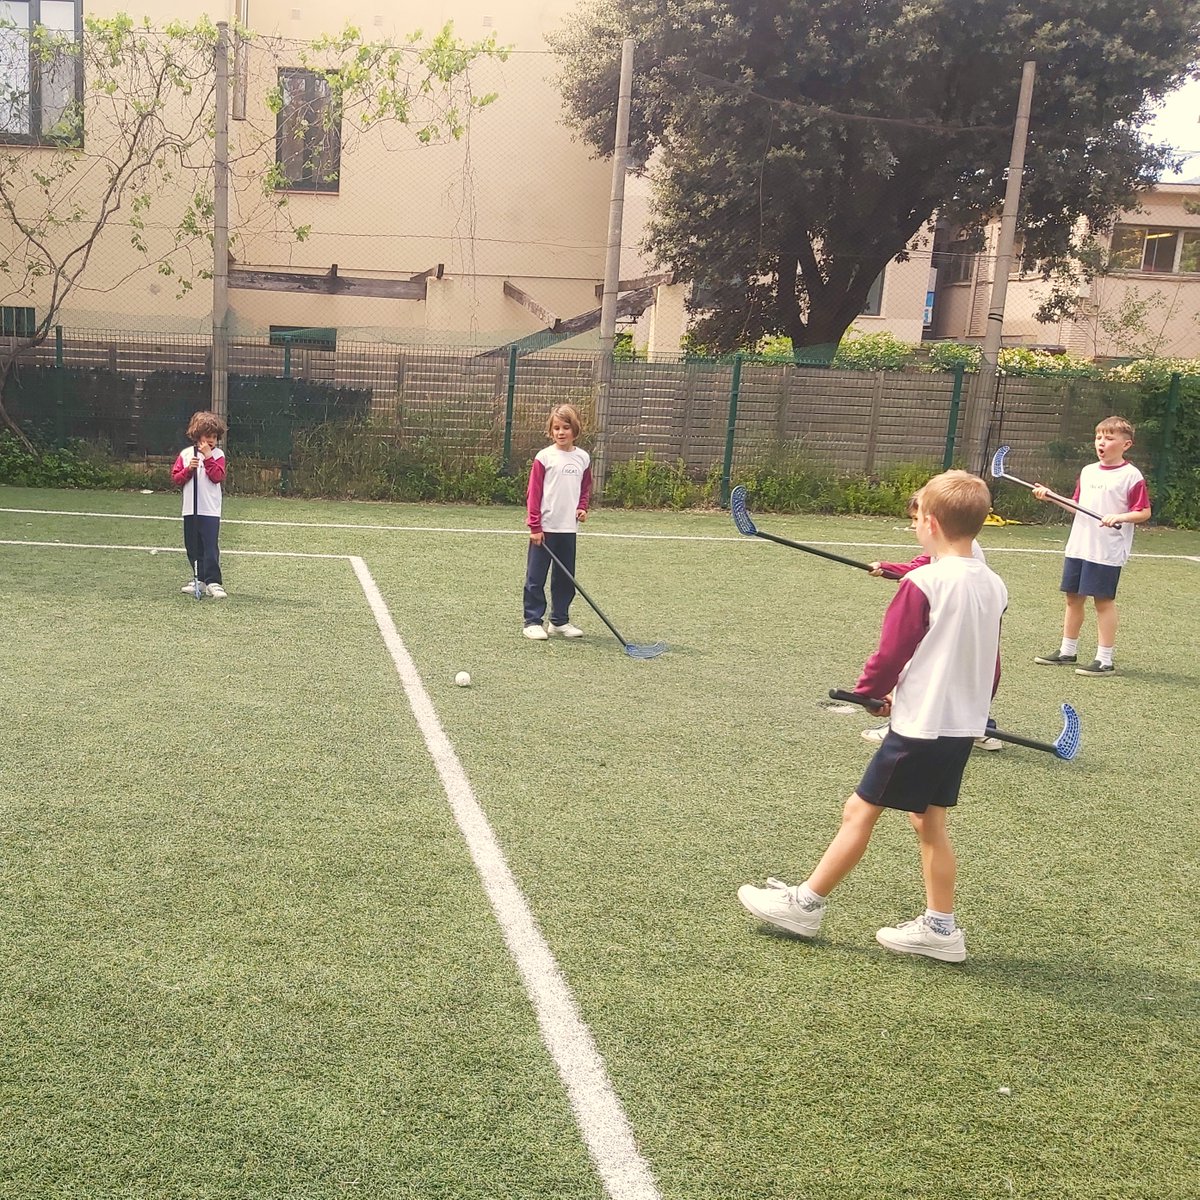 🏑Year 3 & 4 are mastering hockey skills! 🌟 It's more than goals – it's hand-eye coordination, agility, & tactical thinking. By controlling the ball, they're sharpening both body & mind. 💪 #HockeySkills #wherelearningcomesalive🏑